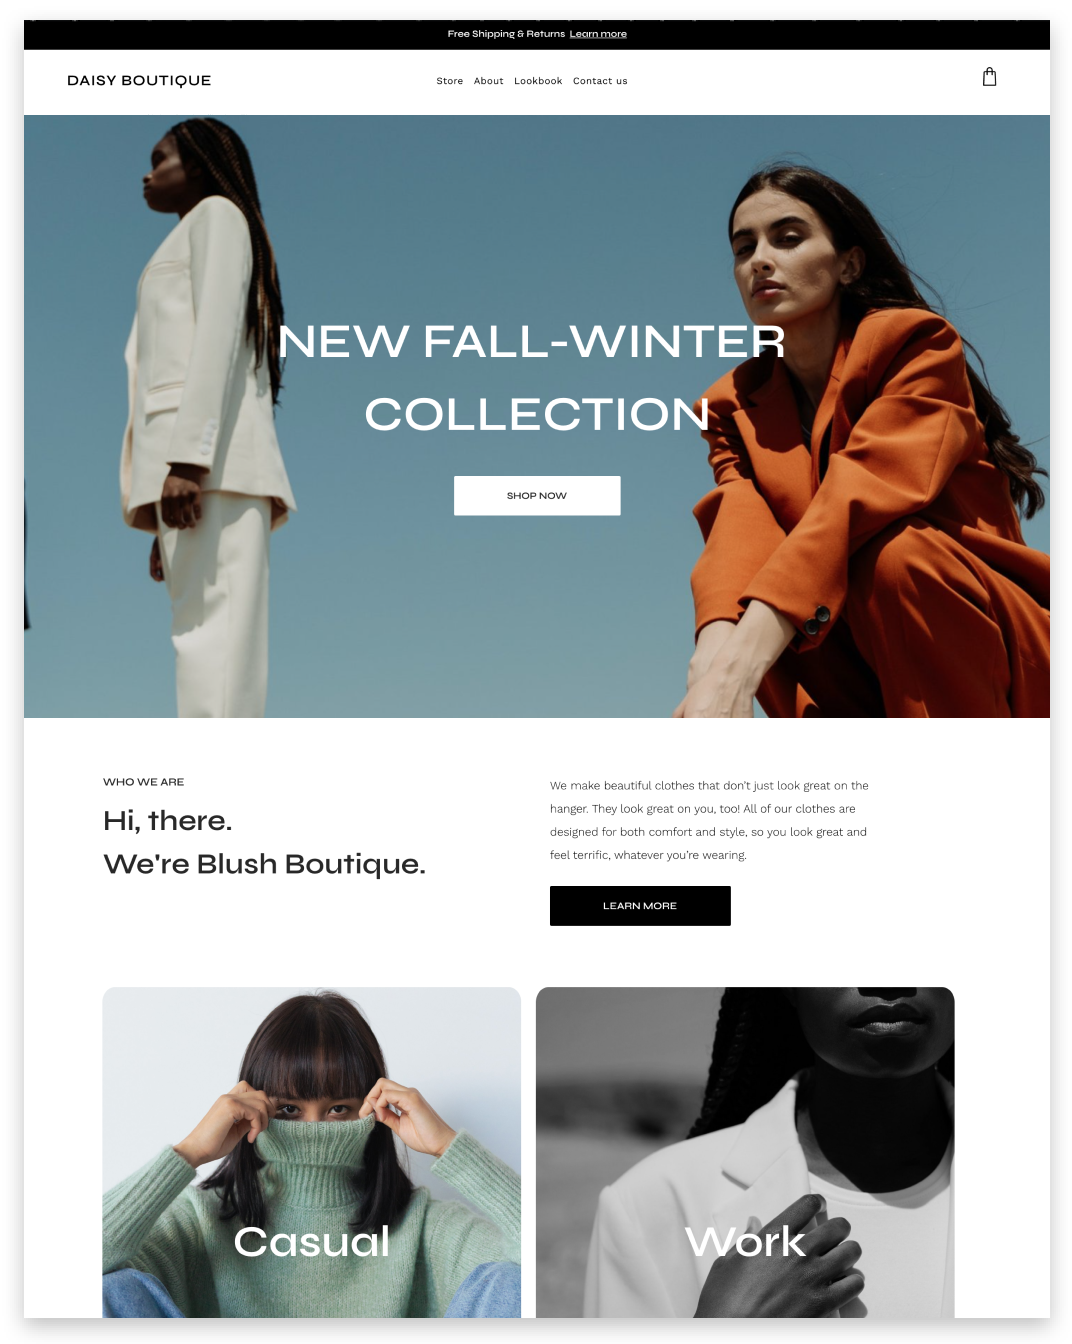 A screenshot of a website for a new fall winter collection.